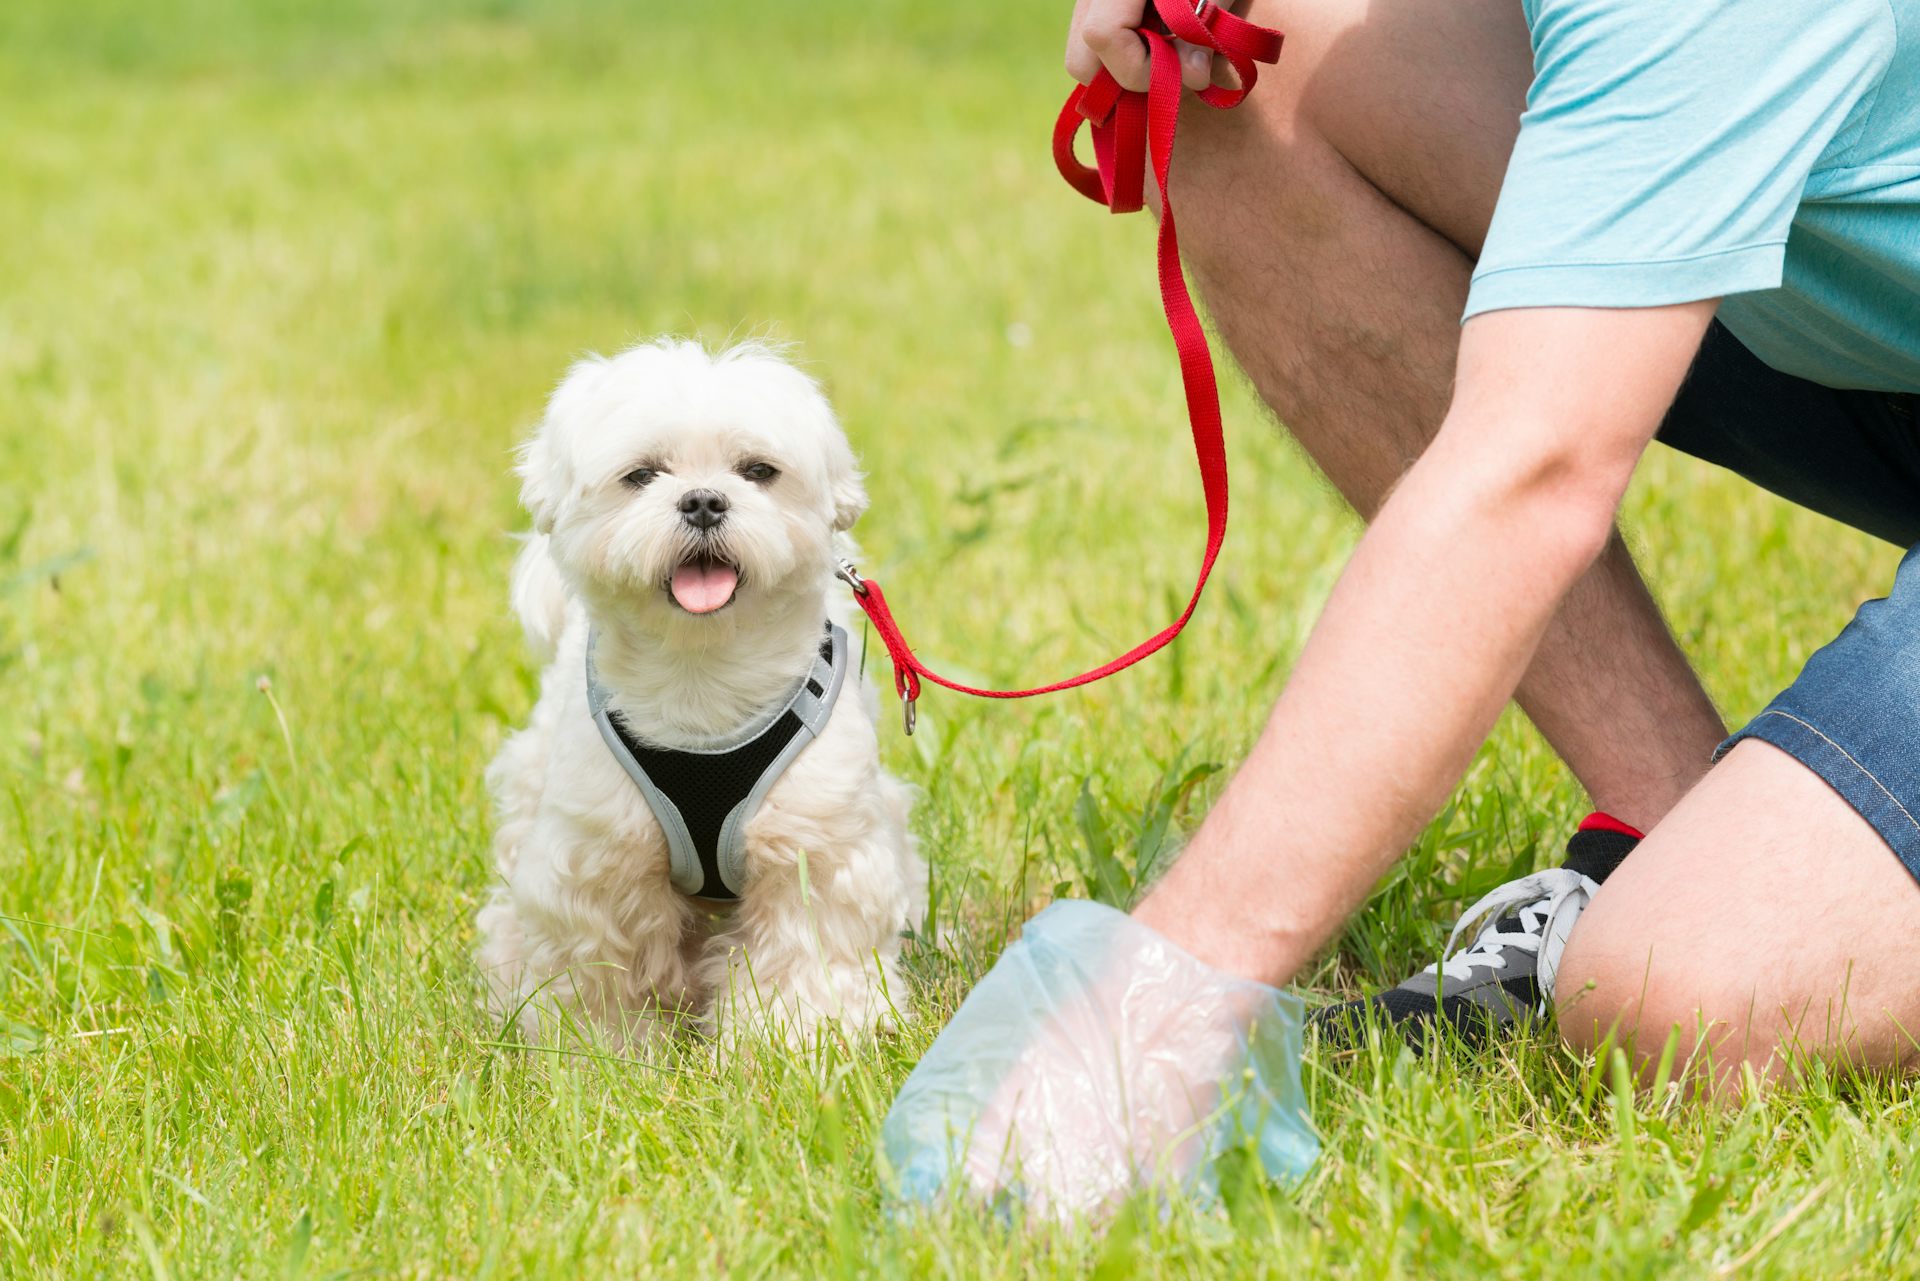 what to do if baby eats dog poop